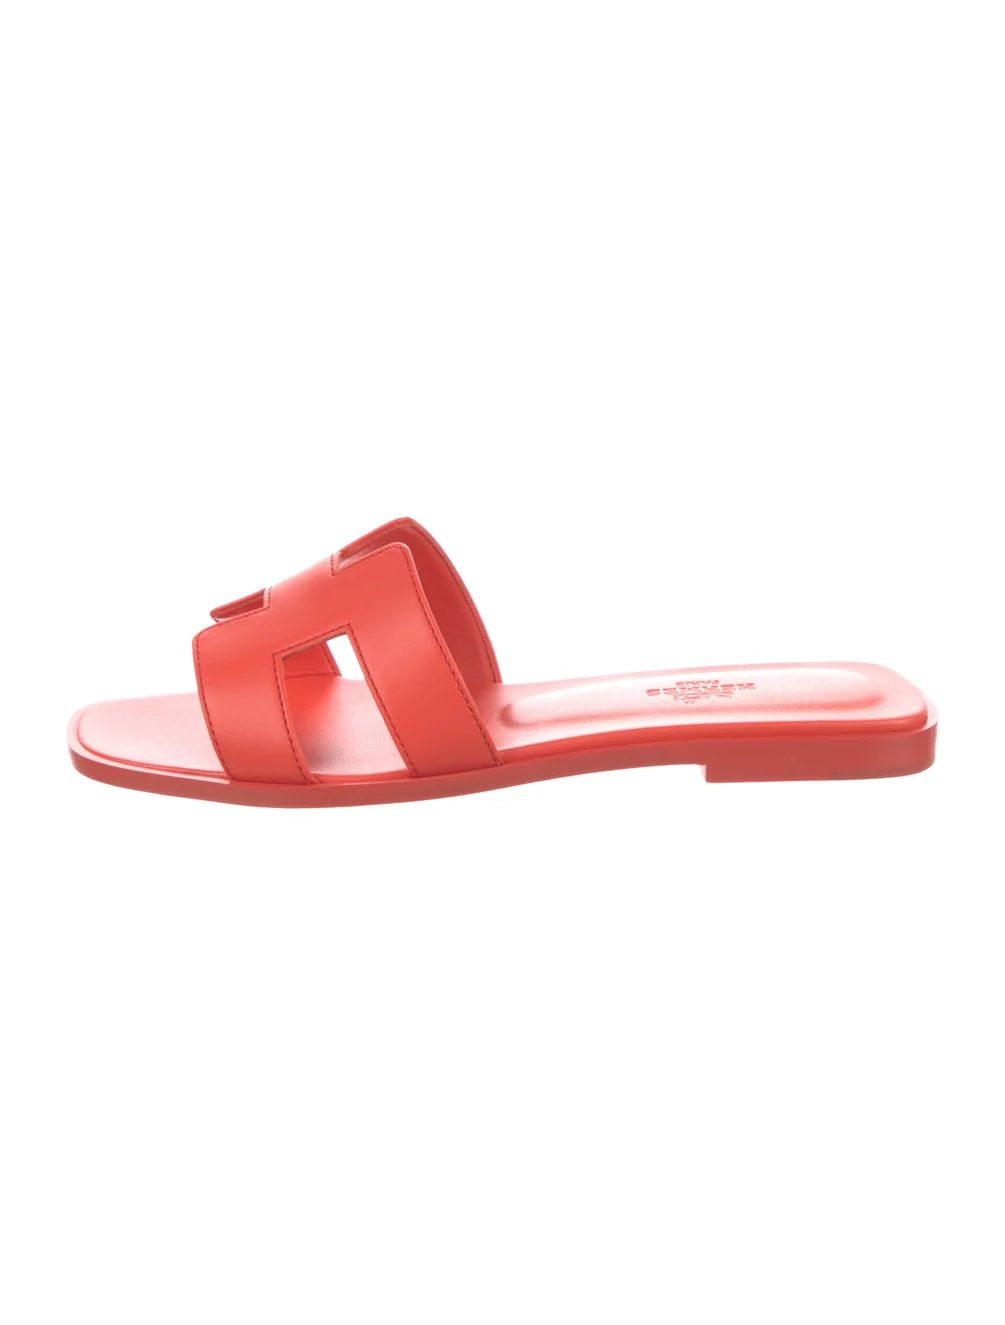 Leather Slides | The RealReal